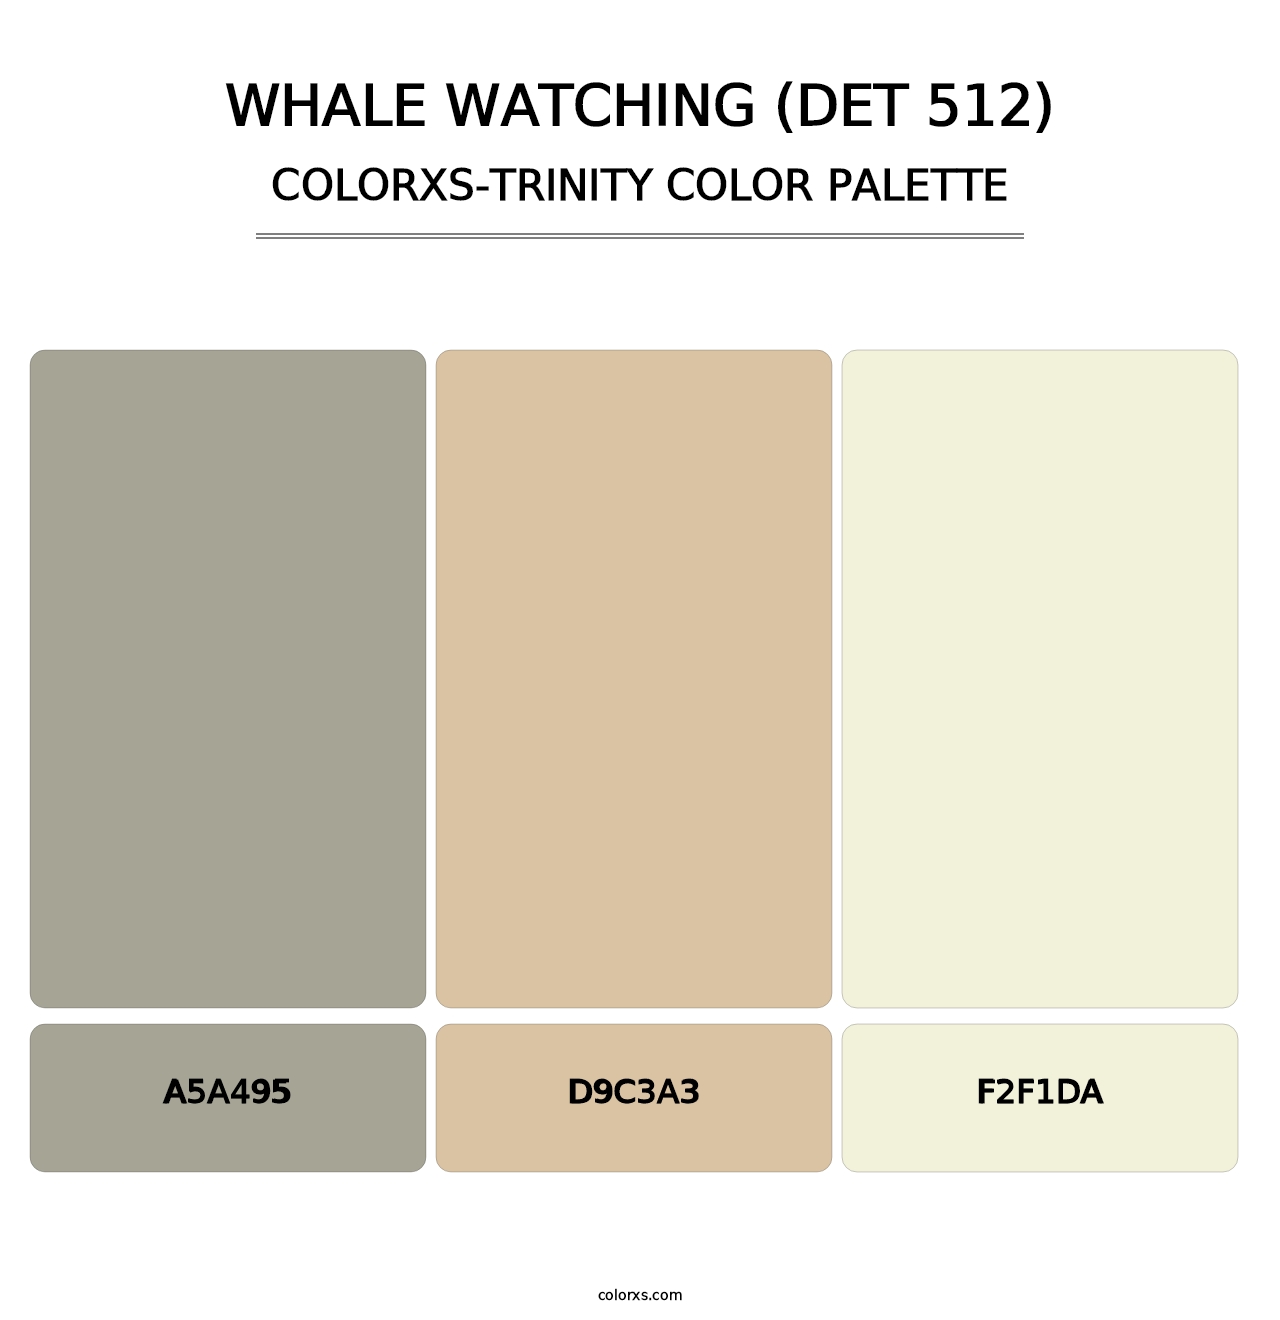 Whale Watching (DET 512) - Colorxs Trinity Palette